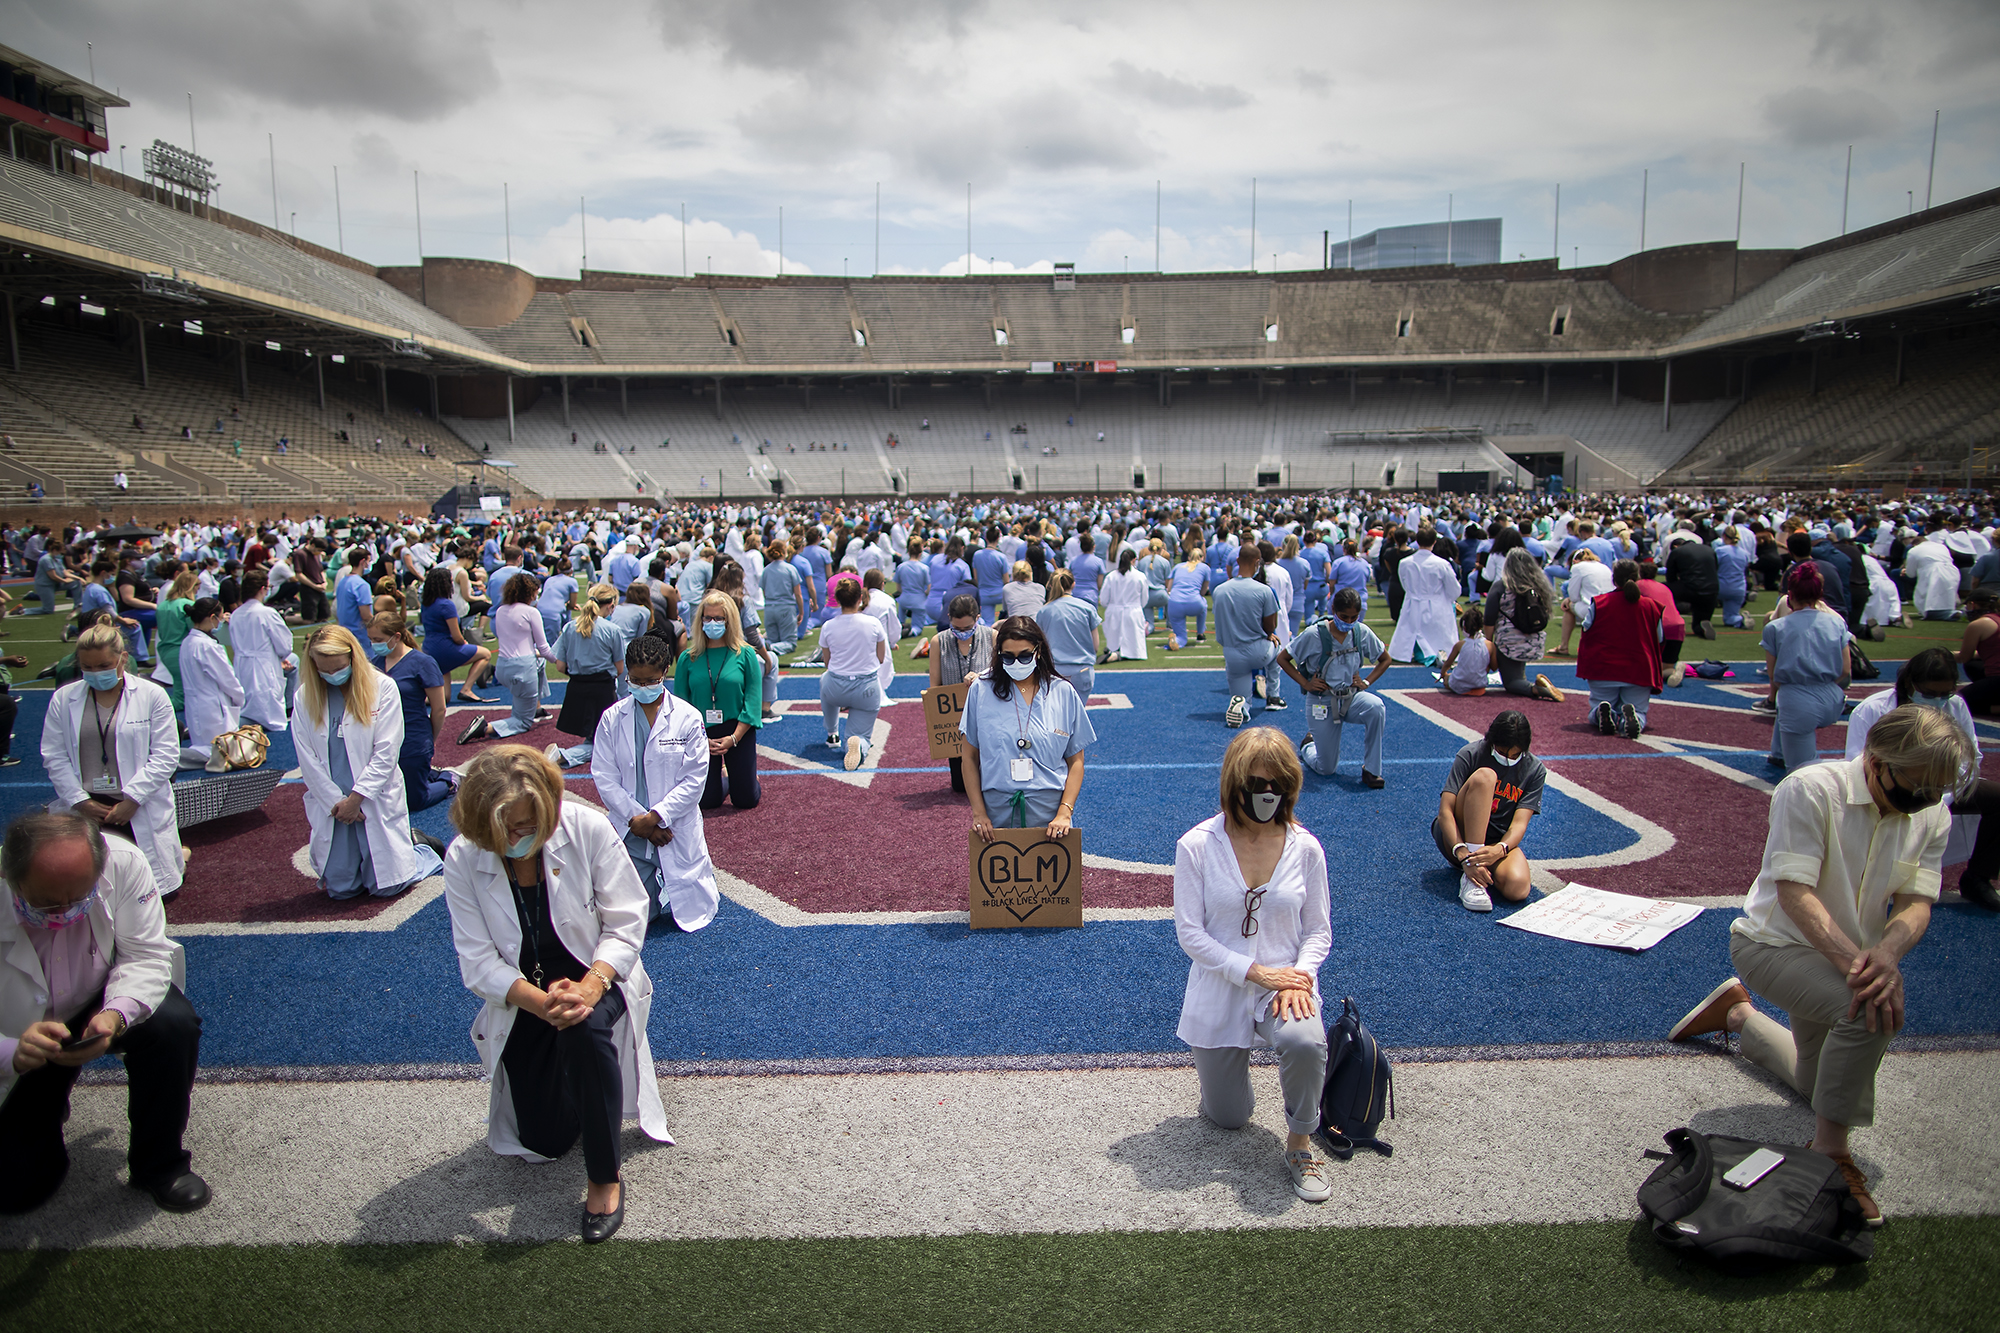 Medical personnel in scrubs, white coats and face masks kneel on the field at Franklin Field, one holds a sign with the letters BLM surrounded by a heart.